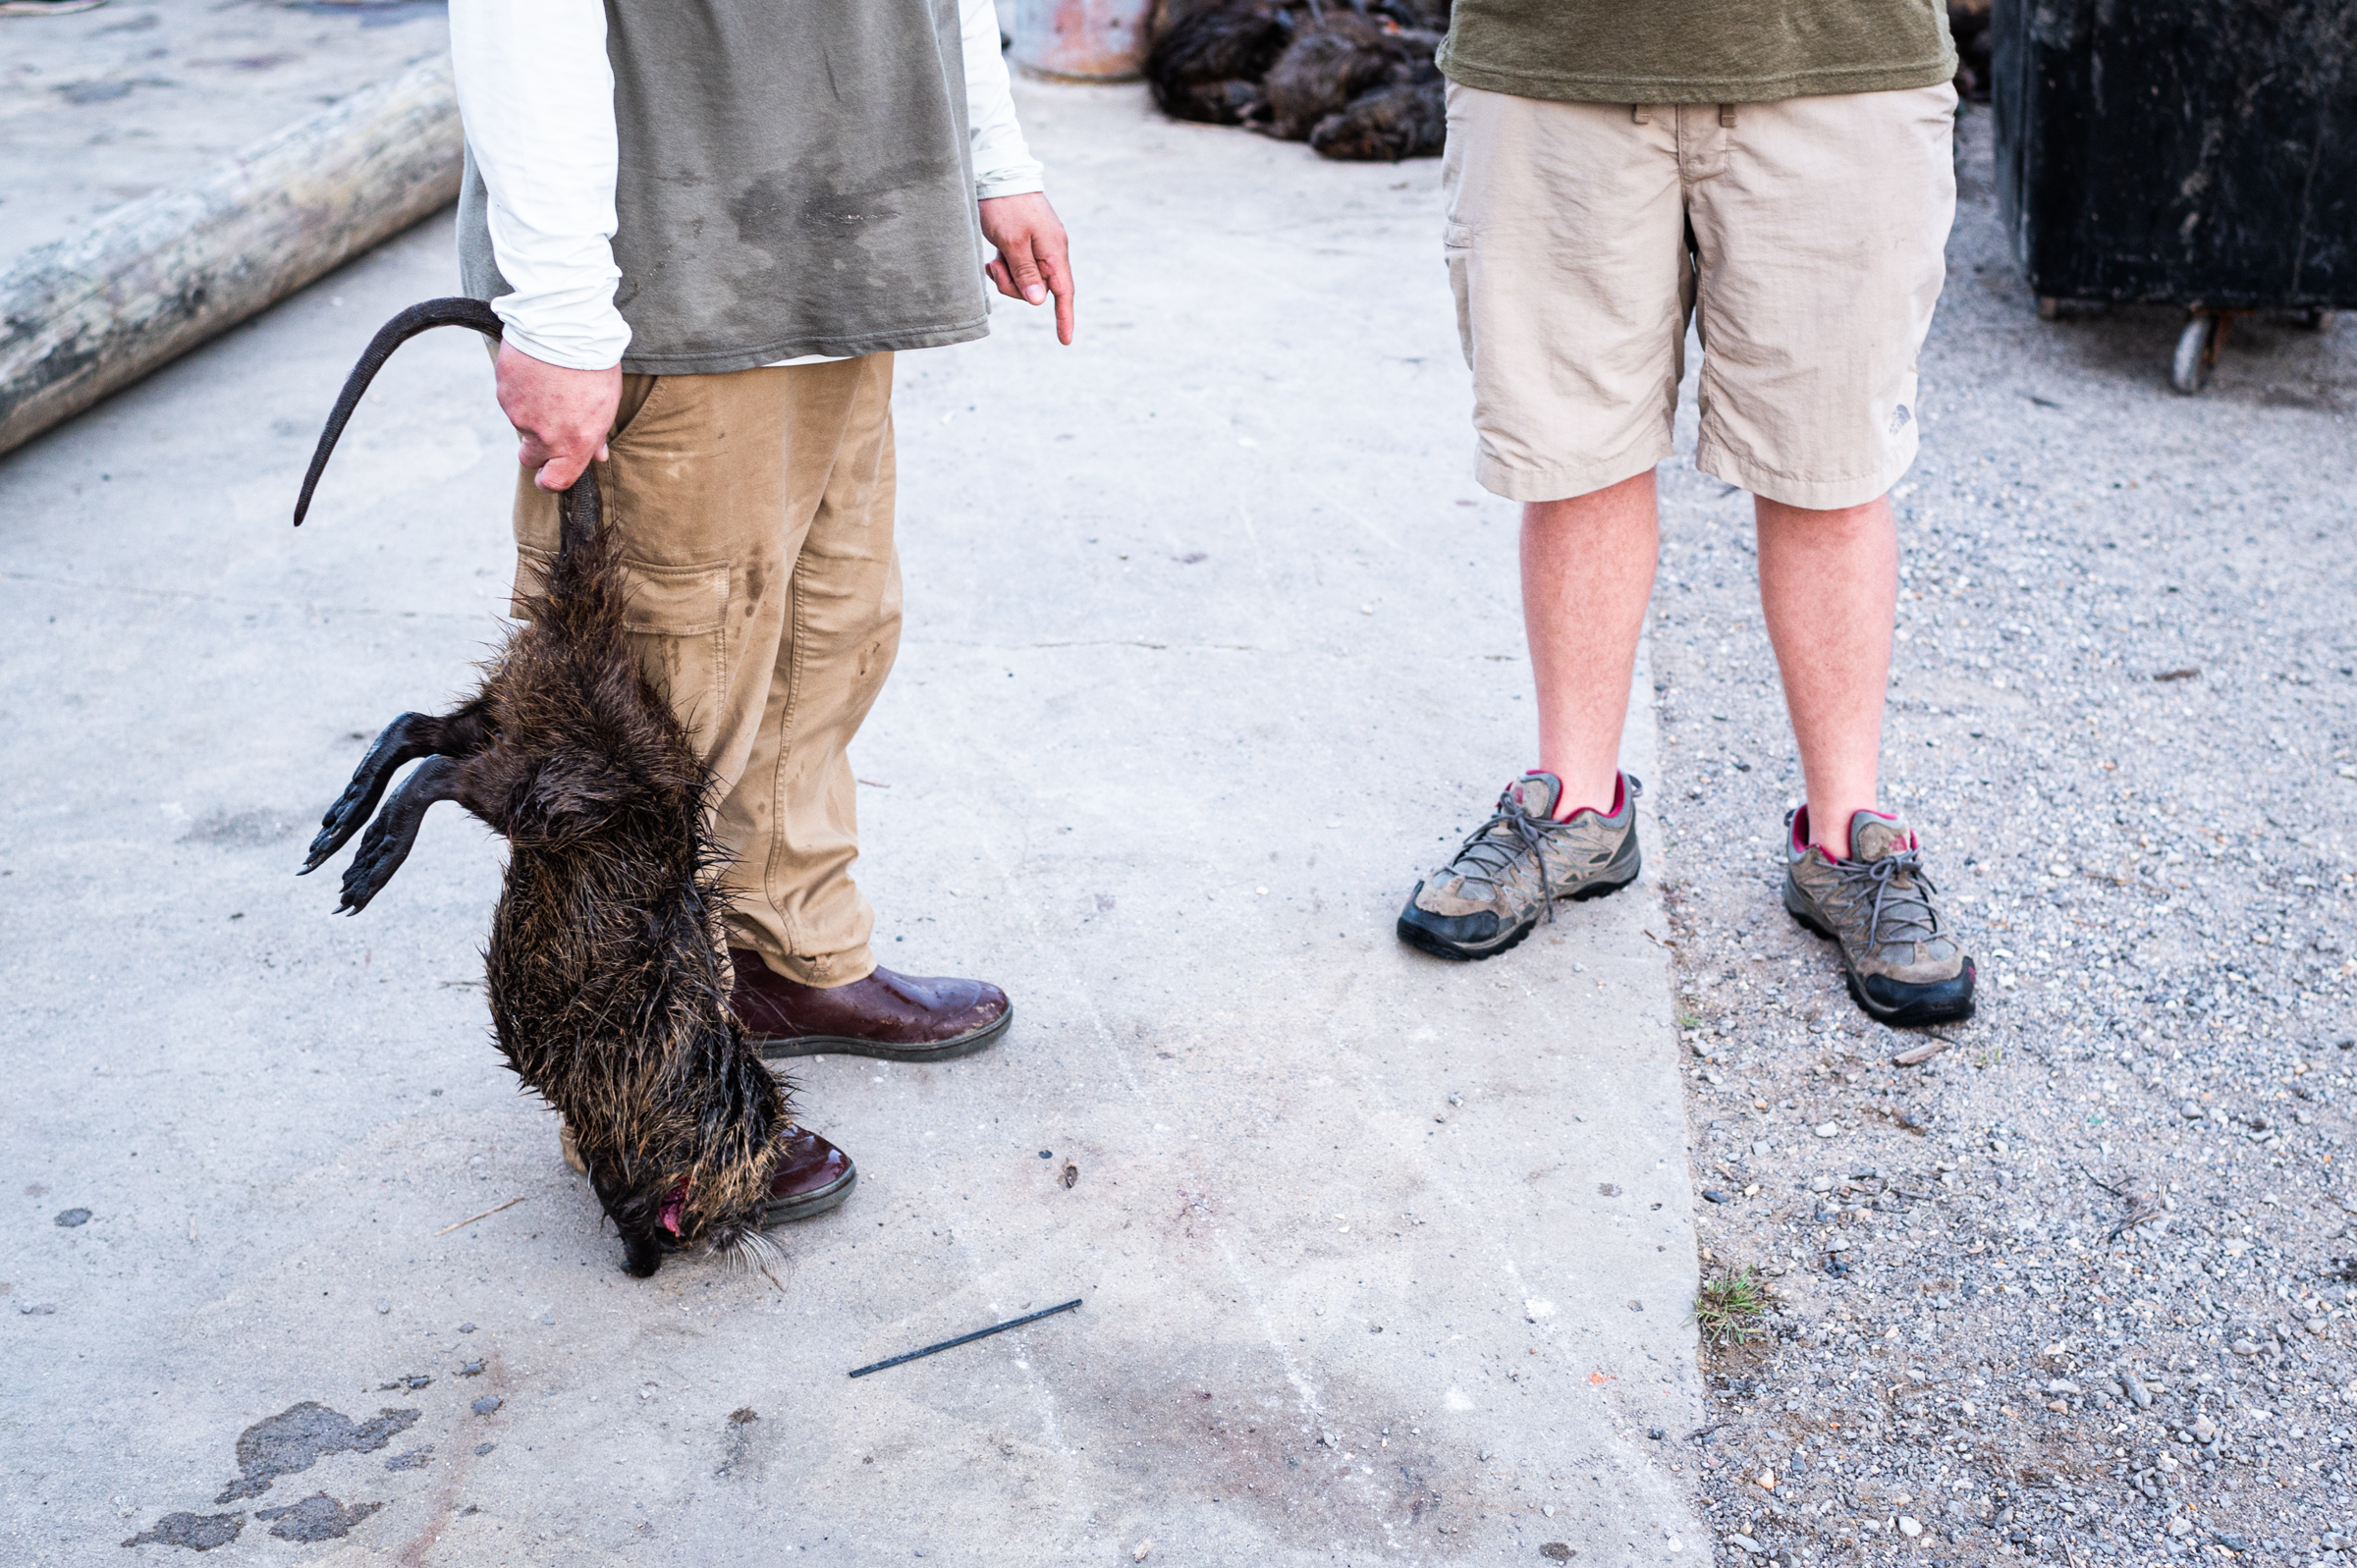 Contestants in the Nutria Rodeo chat while holding one of the rodents by the tail